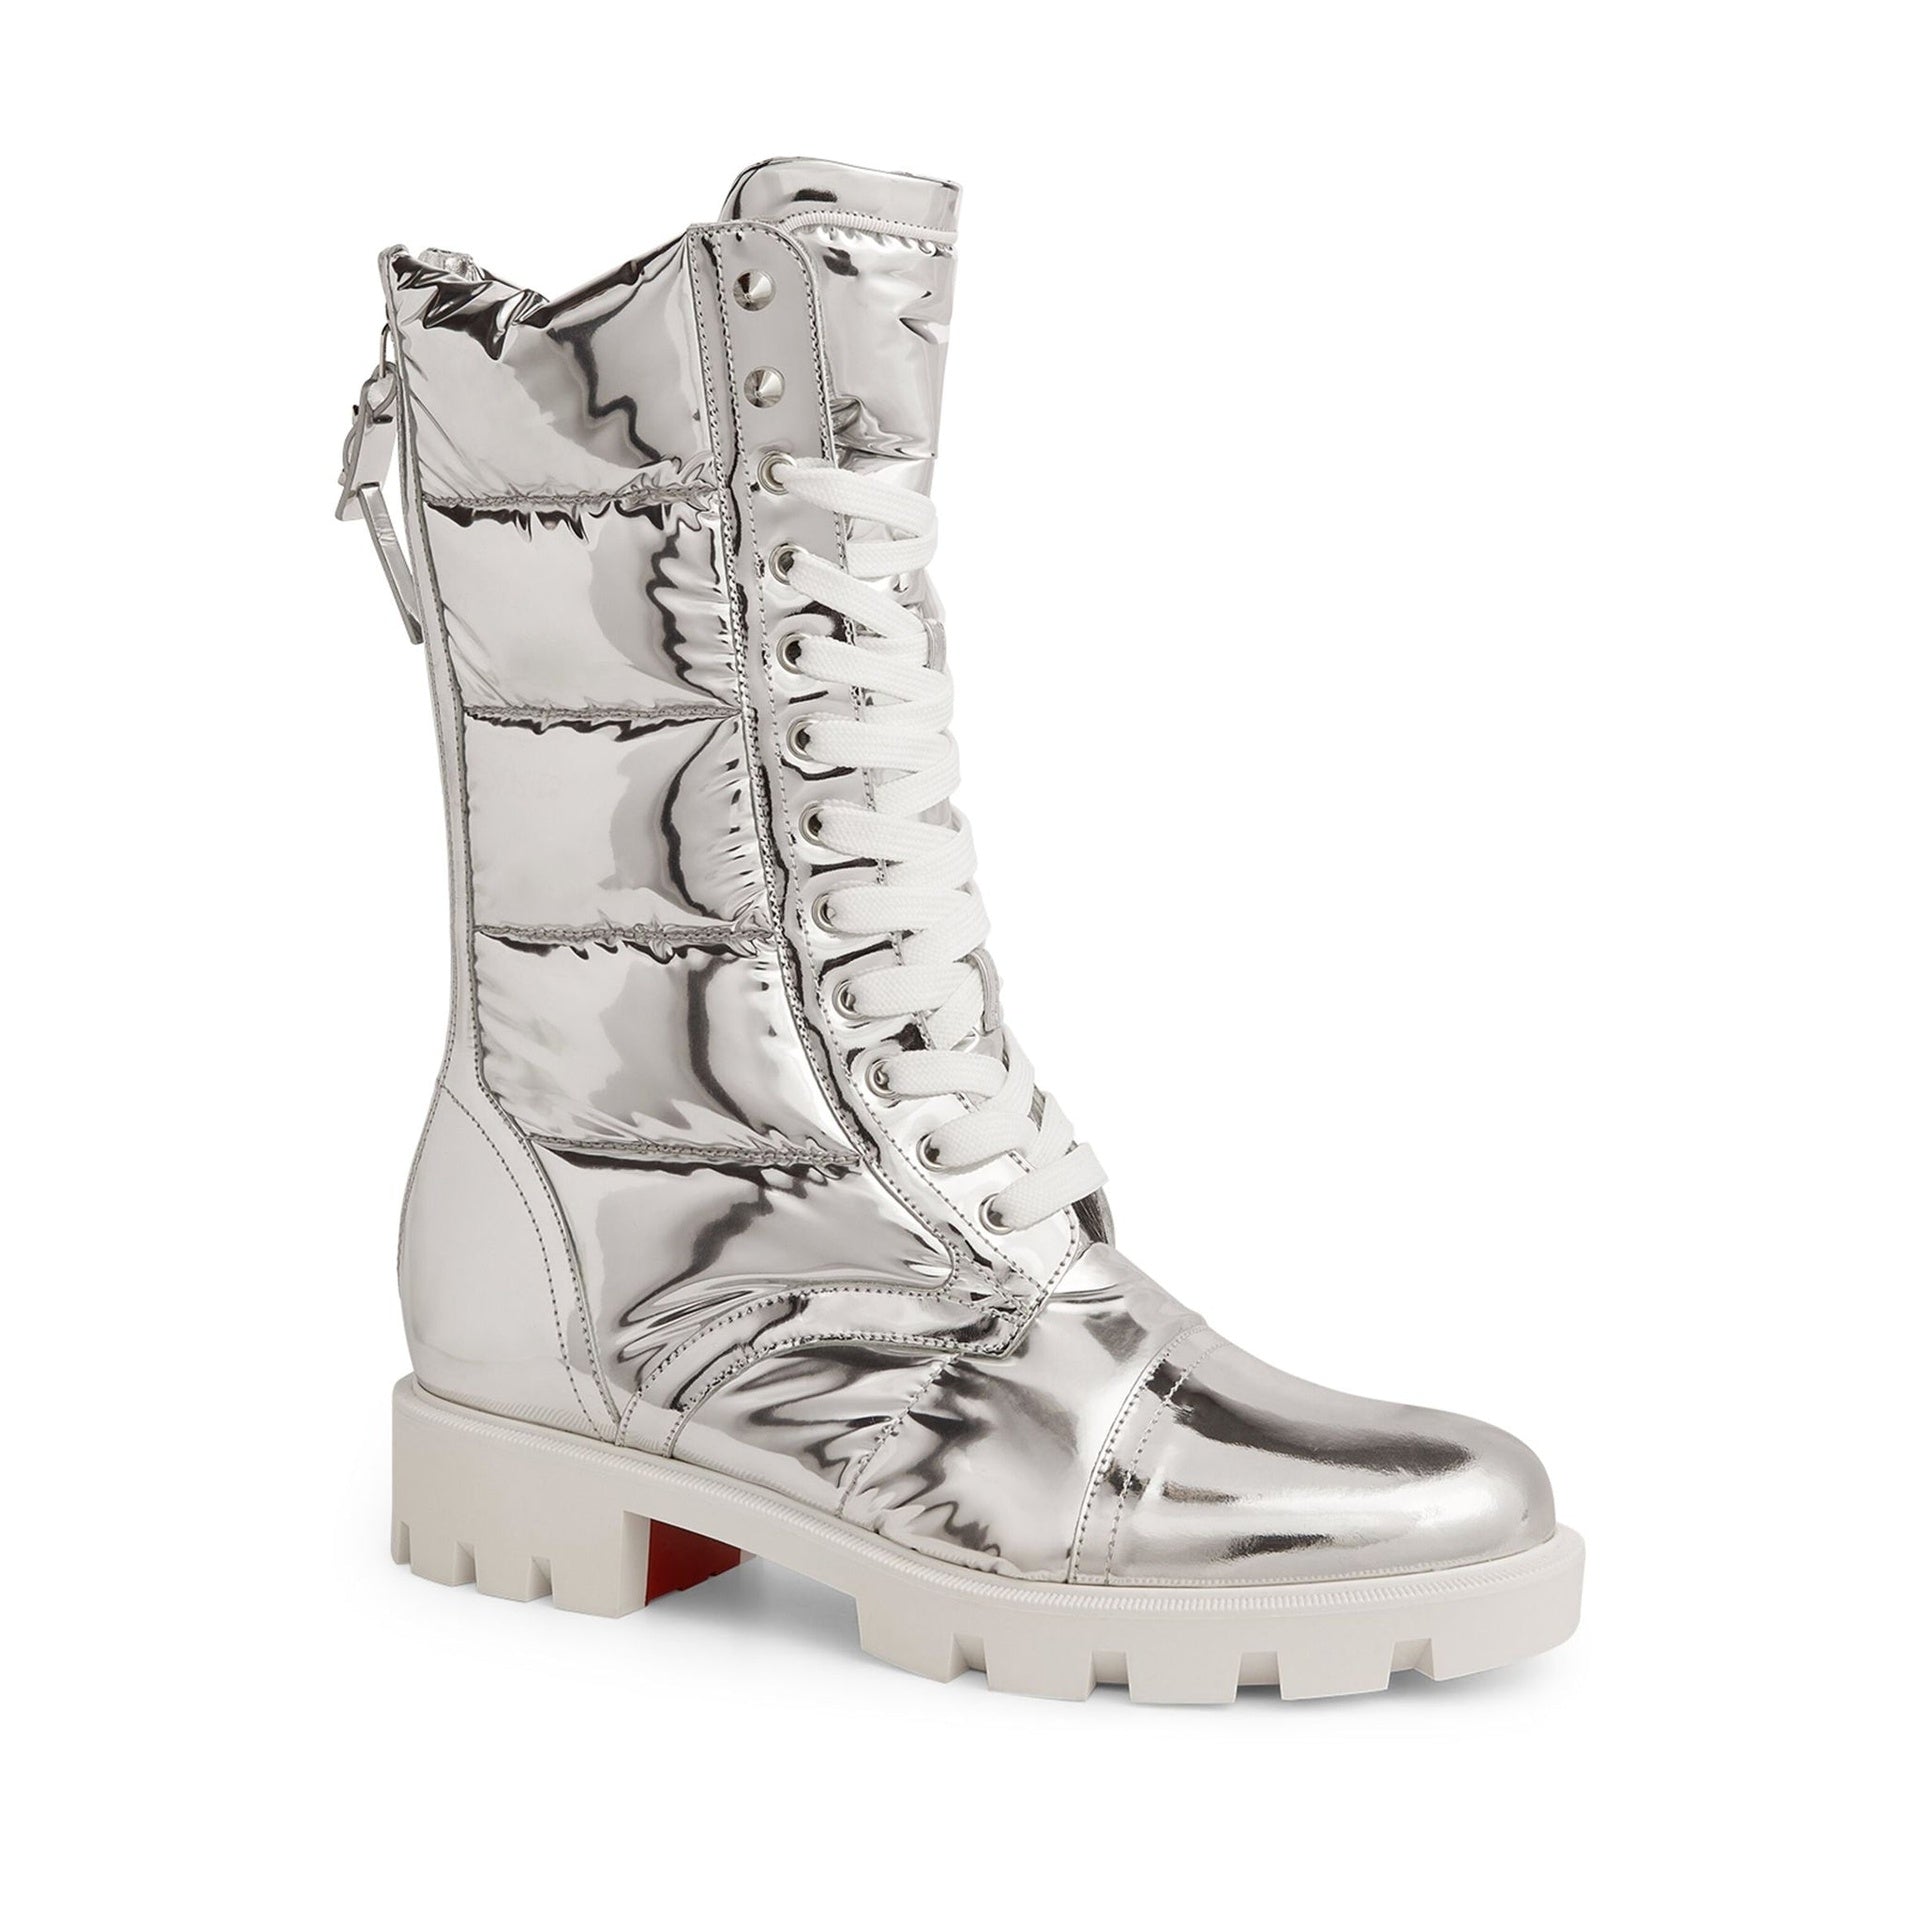 CHRISTIAN-LOUBOUTIN-OUTLET-SALE-Christian-Louboutin-Pavleta-Silver-Boots-Stiefel-Stiefeletten-ARCHIVE-COLLECTION-2.jpg